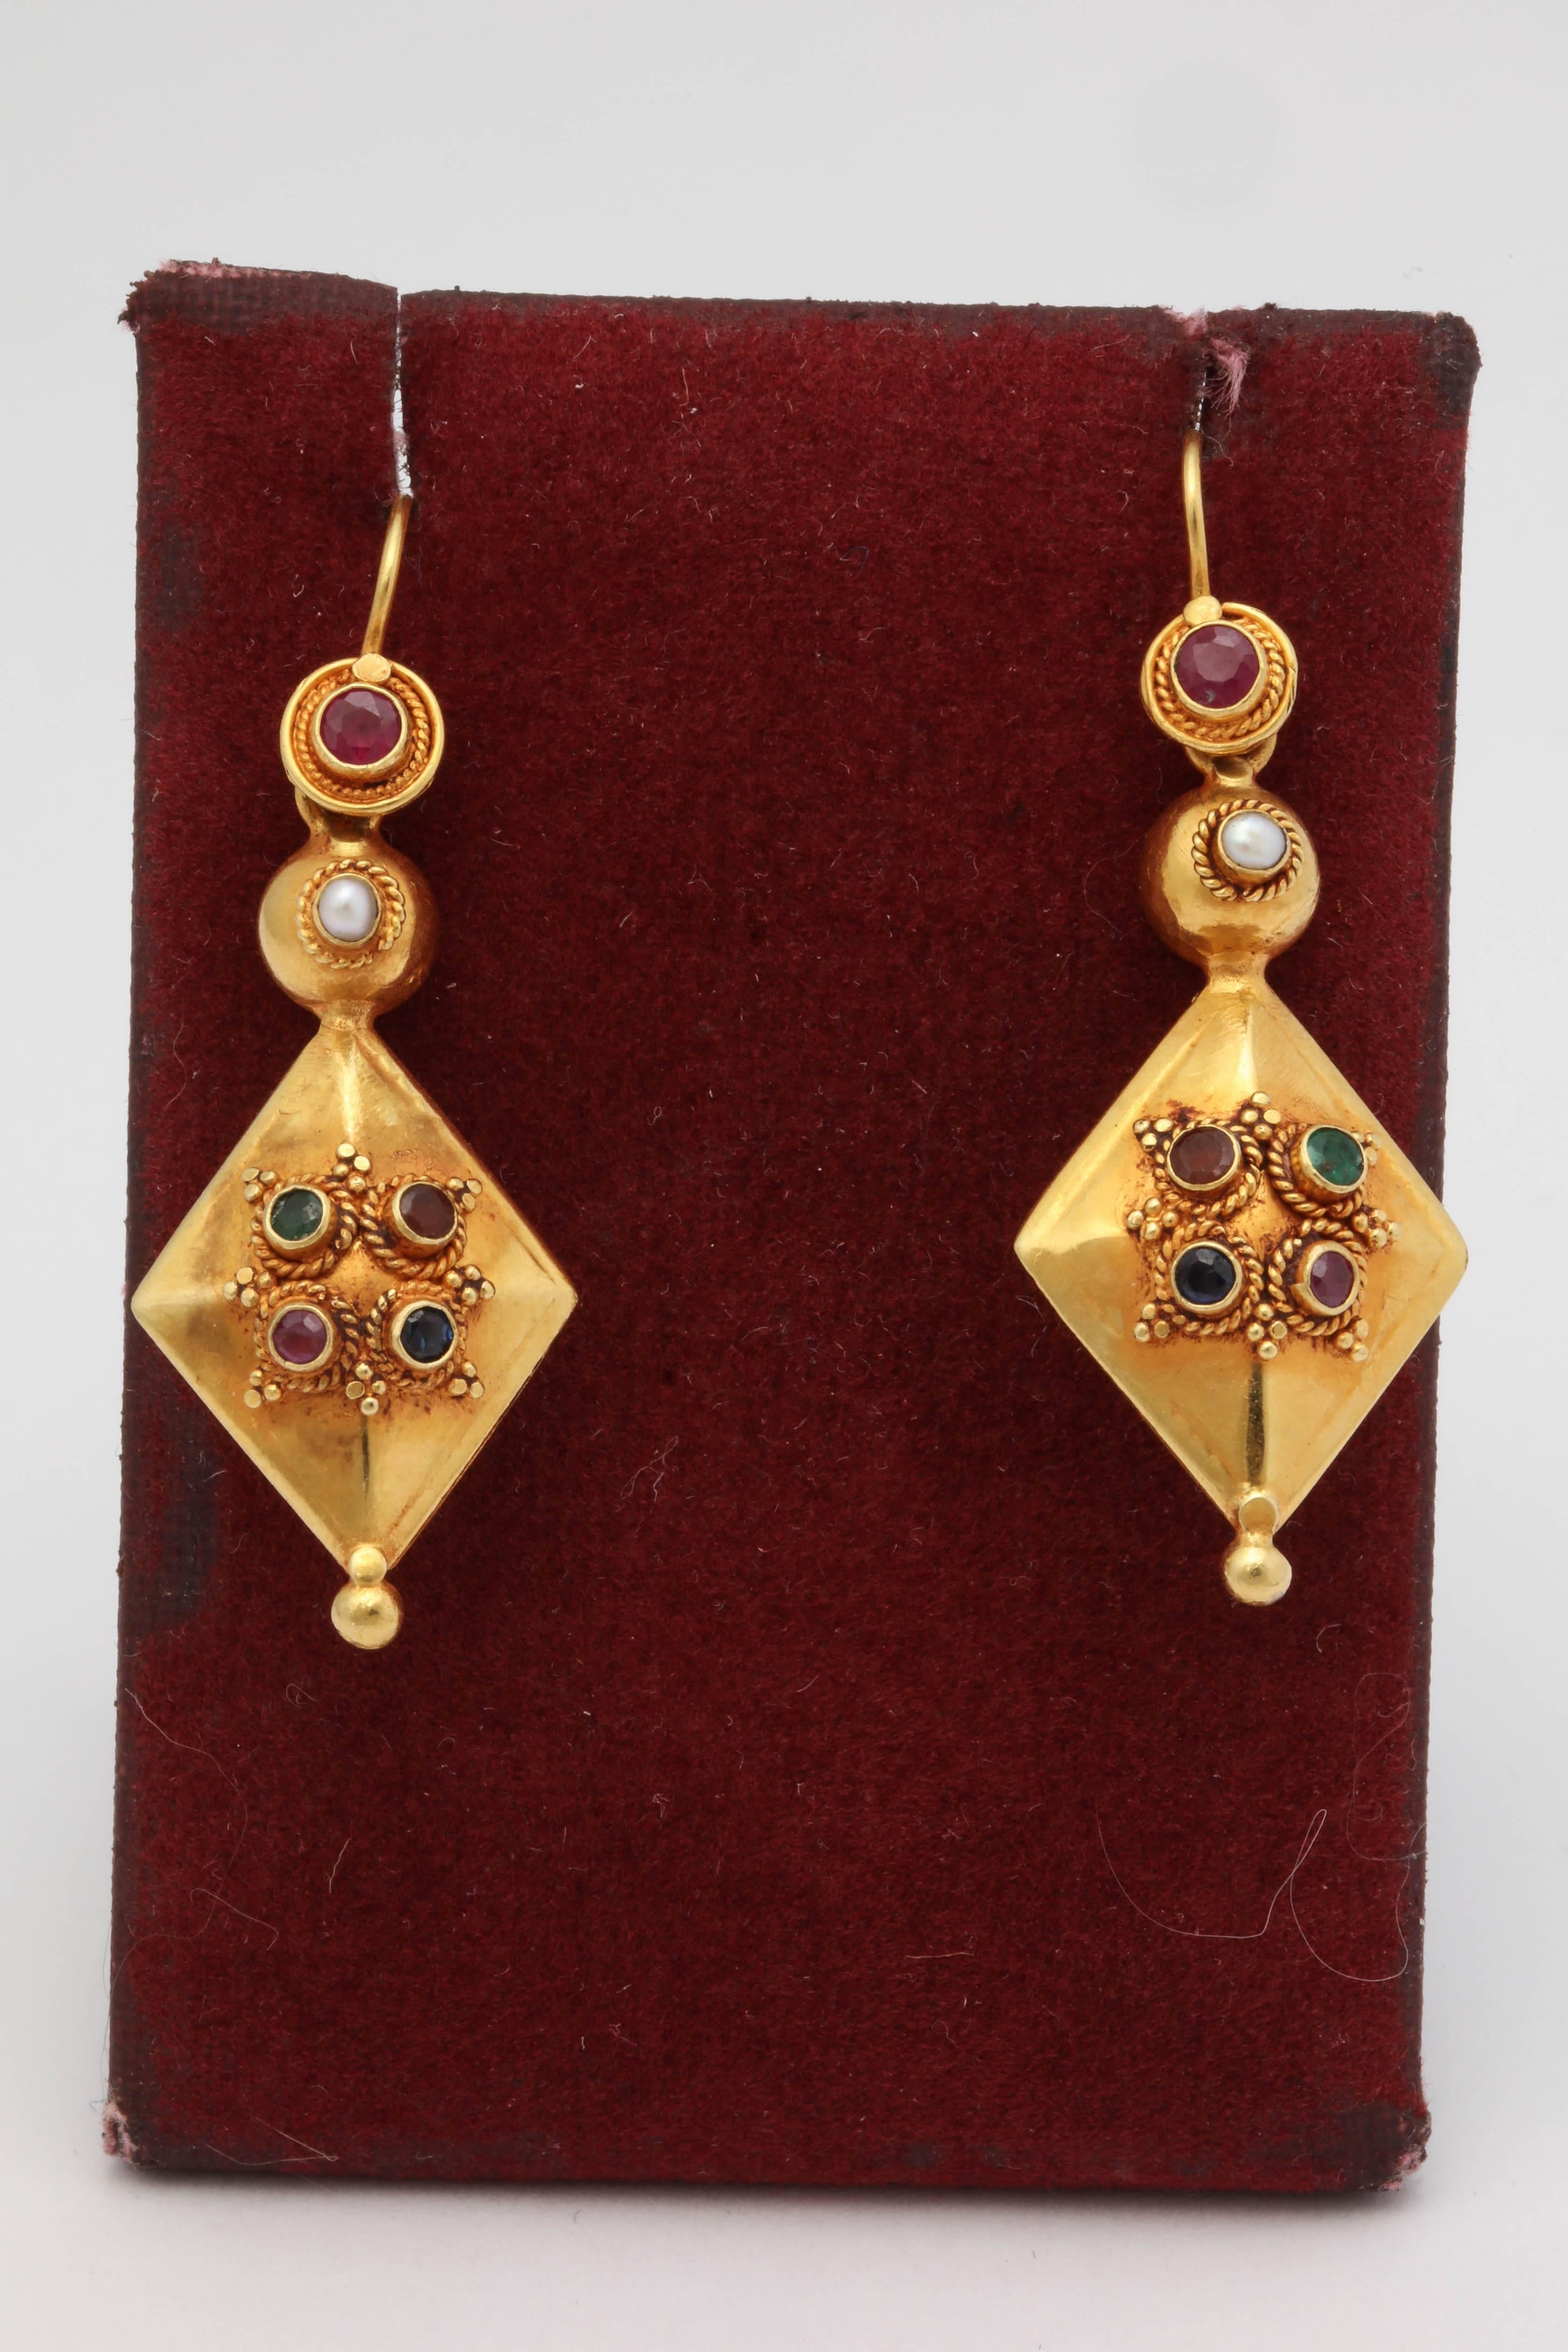 One Pair Of Ladies 22kt Dangle Earrings Exemplifying Beautiful Handmade Twisted Rope Design Detail With The Workmanship Of The Earrings. Earrings Are Further Designed With Six Bezel Set Faceted Rubies And Two Bezel Set Faceted Sapphires With Two